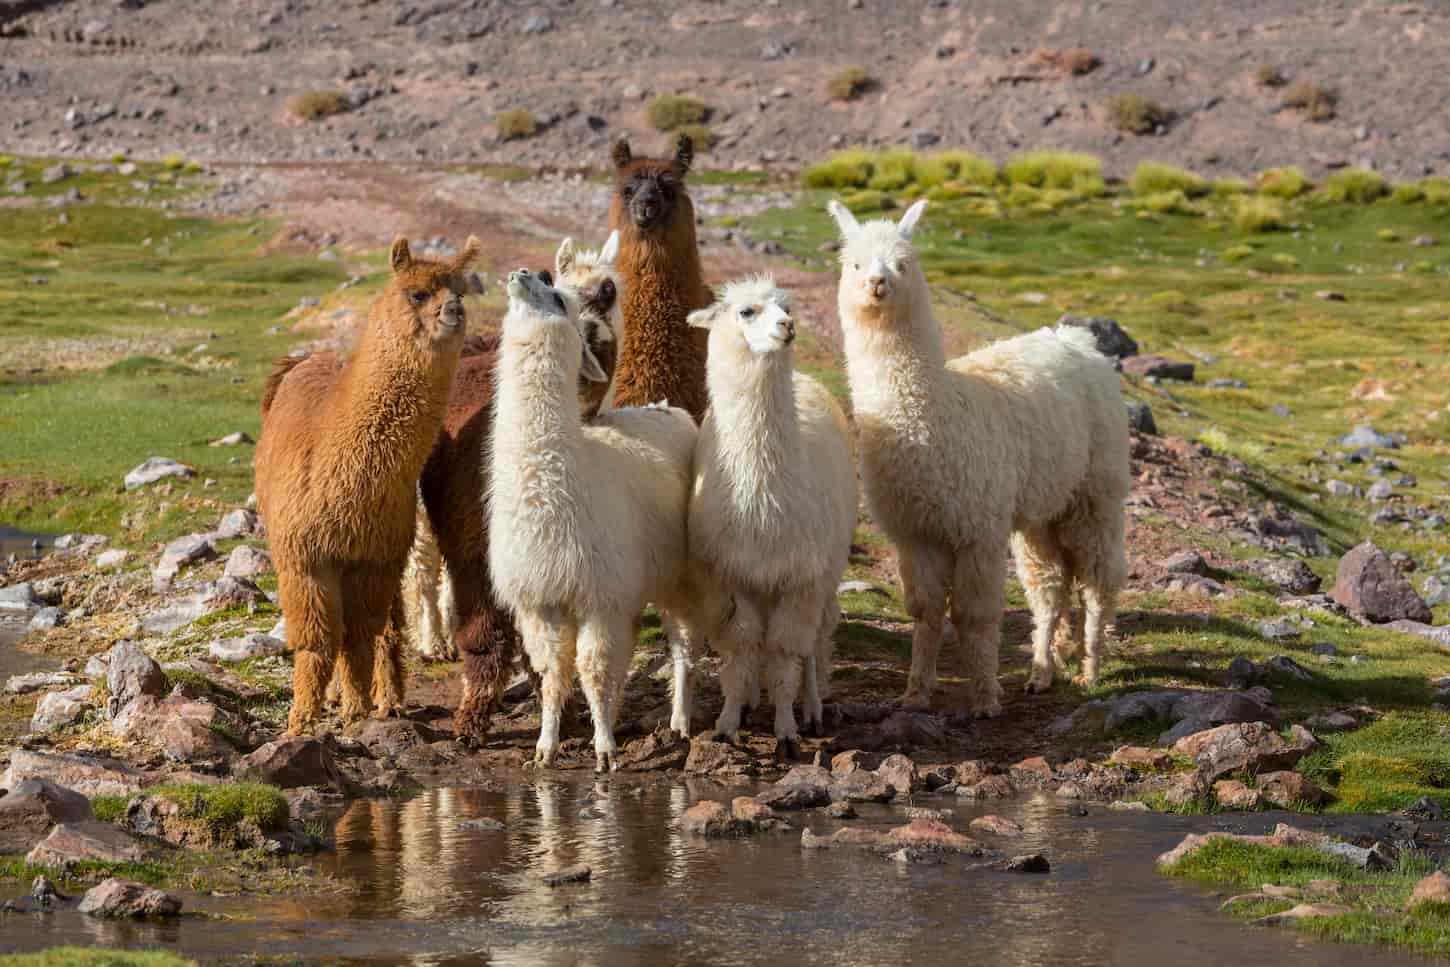 An image of a group of llamas standing infront of a water stream and looking at the camera..